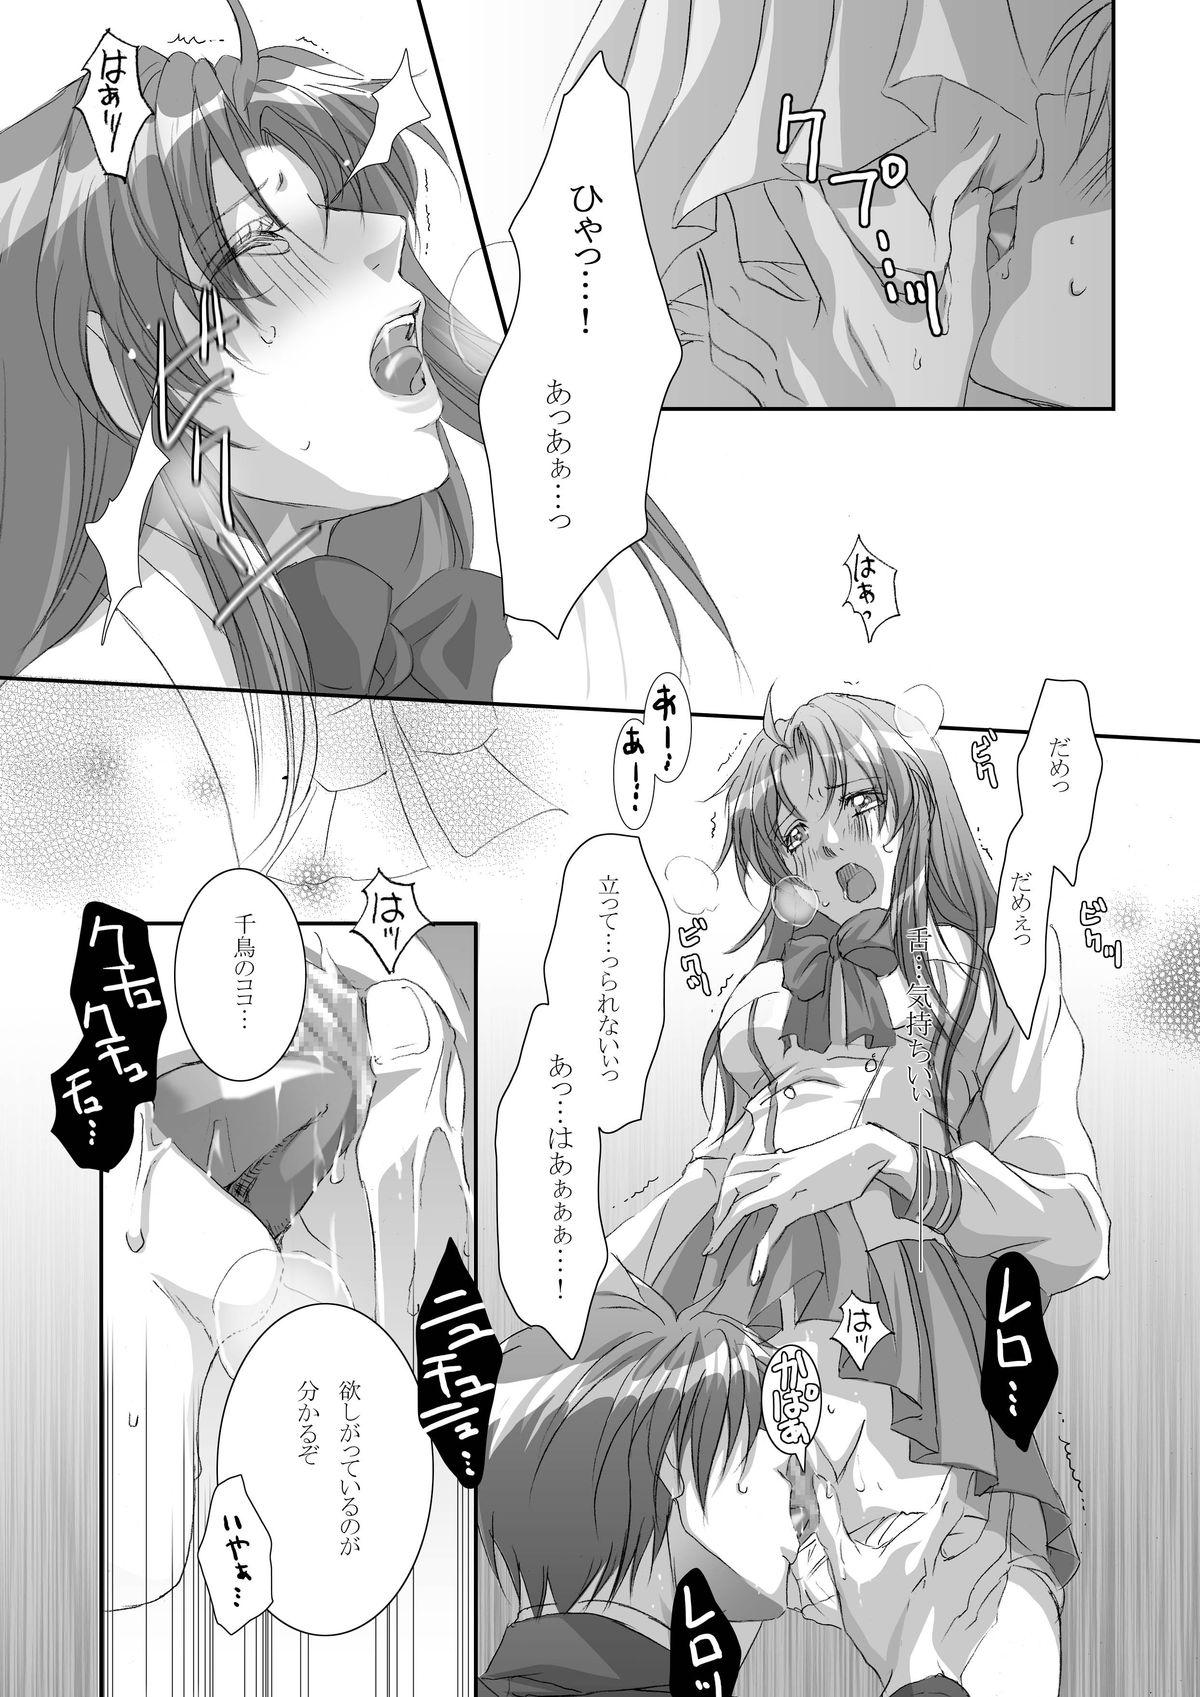 Grosso Anjel Seven A7 - Full metal panic Lesbiansex - Page 12